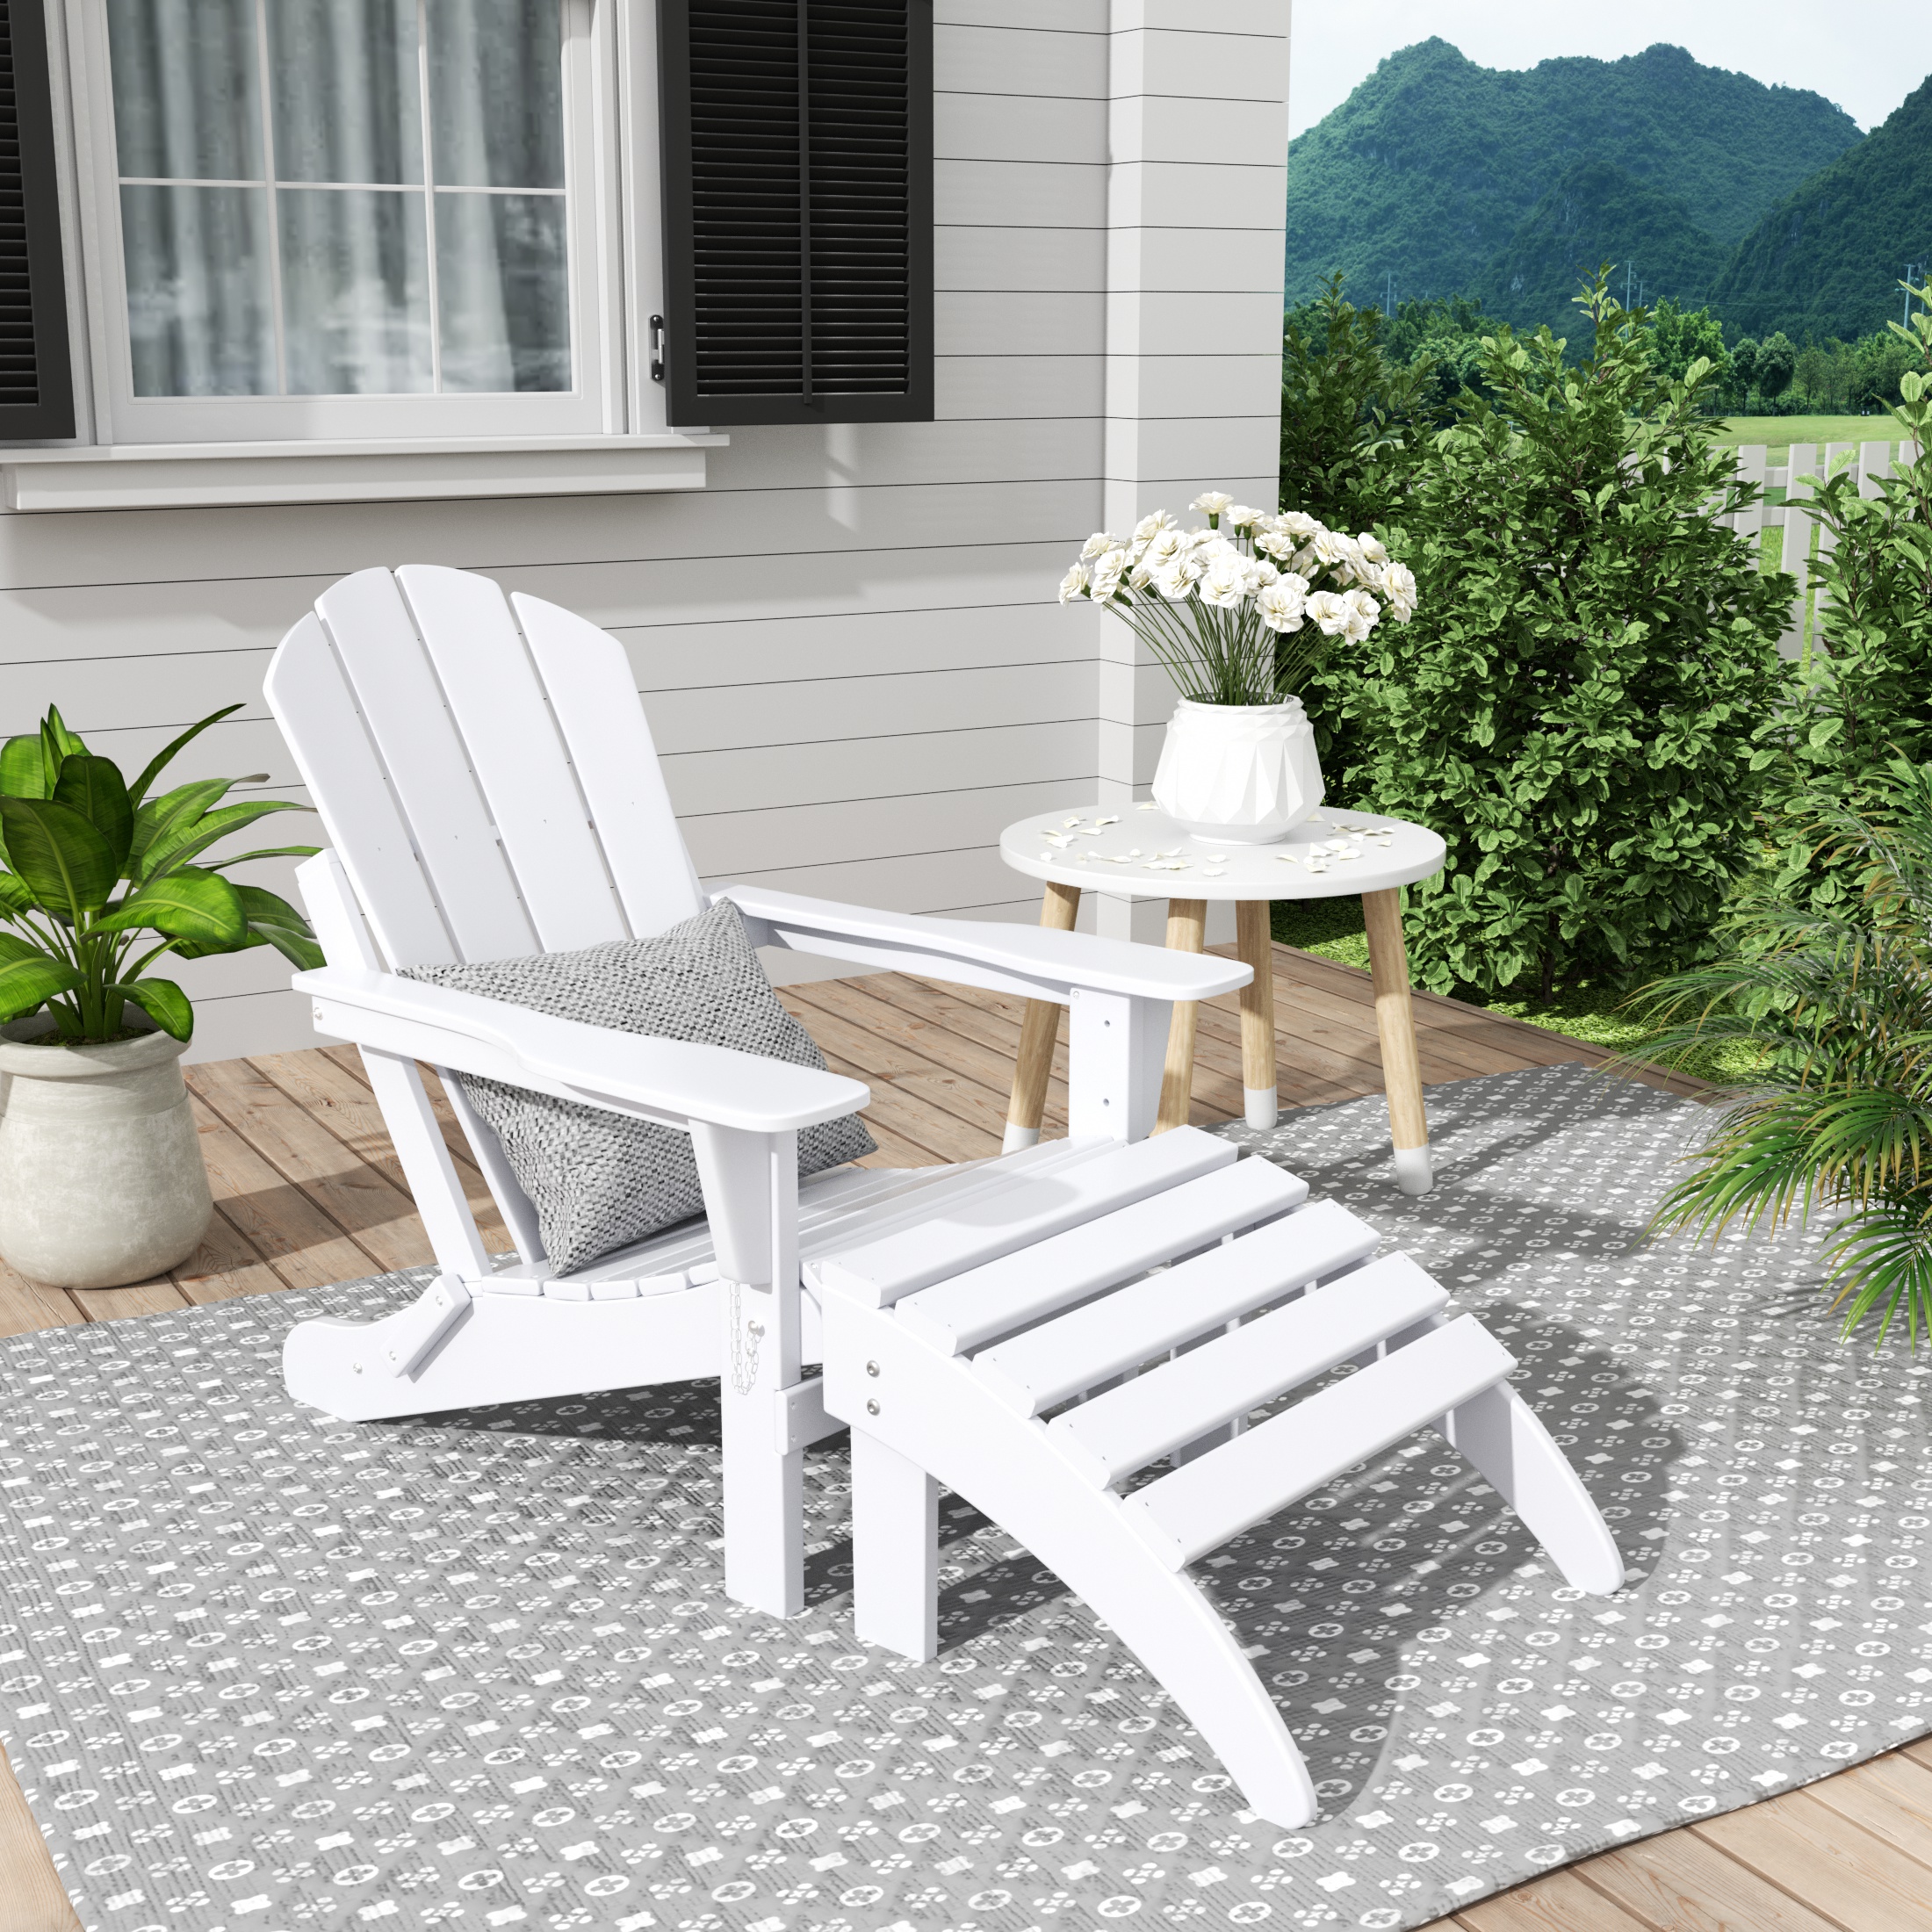 WestinTrends Malibu Outdoor Lounge Chair, 2-Pieces Adirondack Chair Set with Ottoman, All Weather Poly Lumber Patio Lawn Folding Chairs for Outside Pool Garden Backyard Beach, White - image 2 of 6